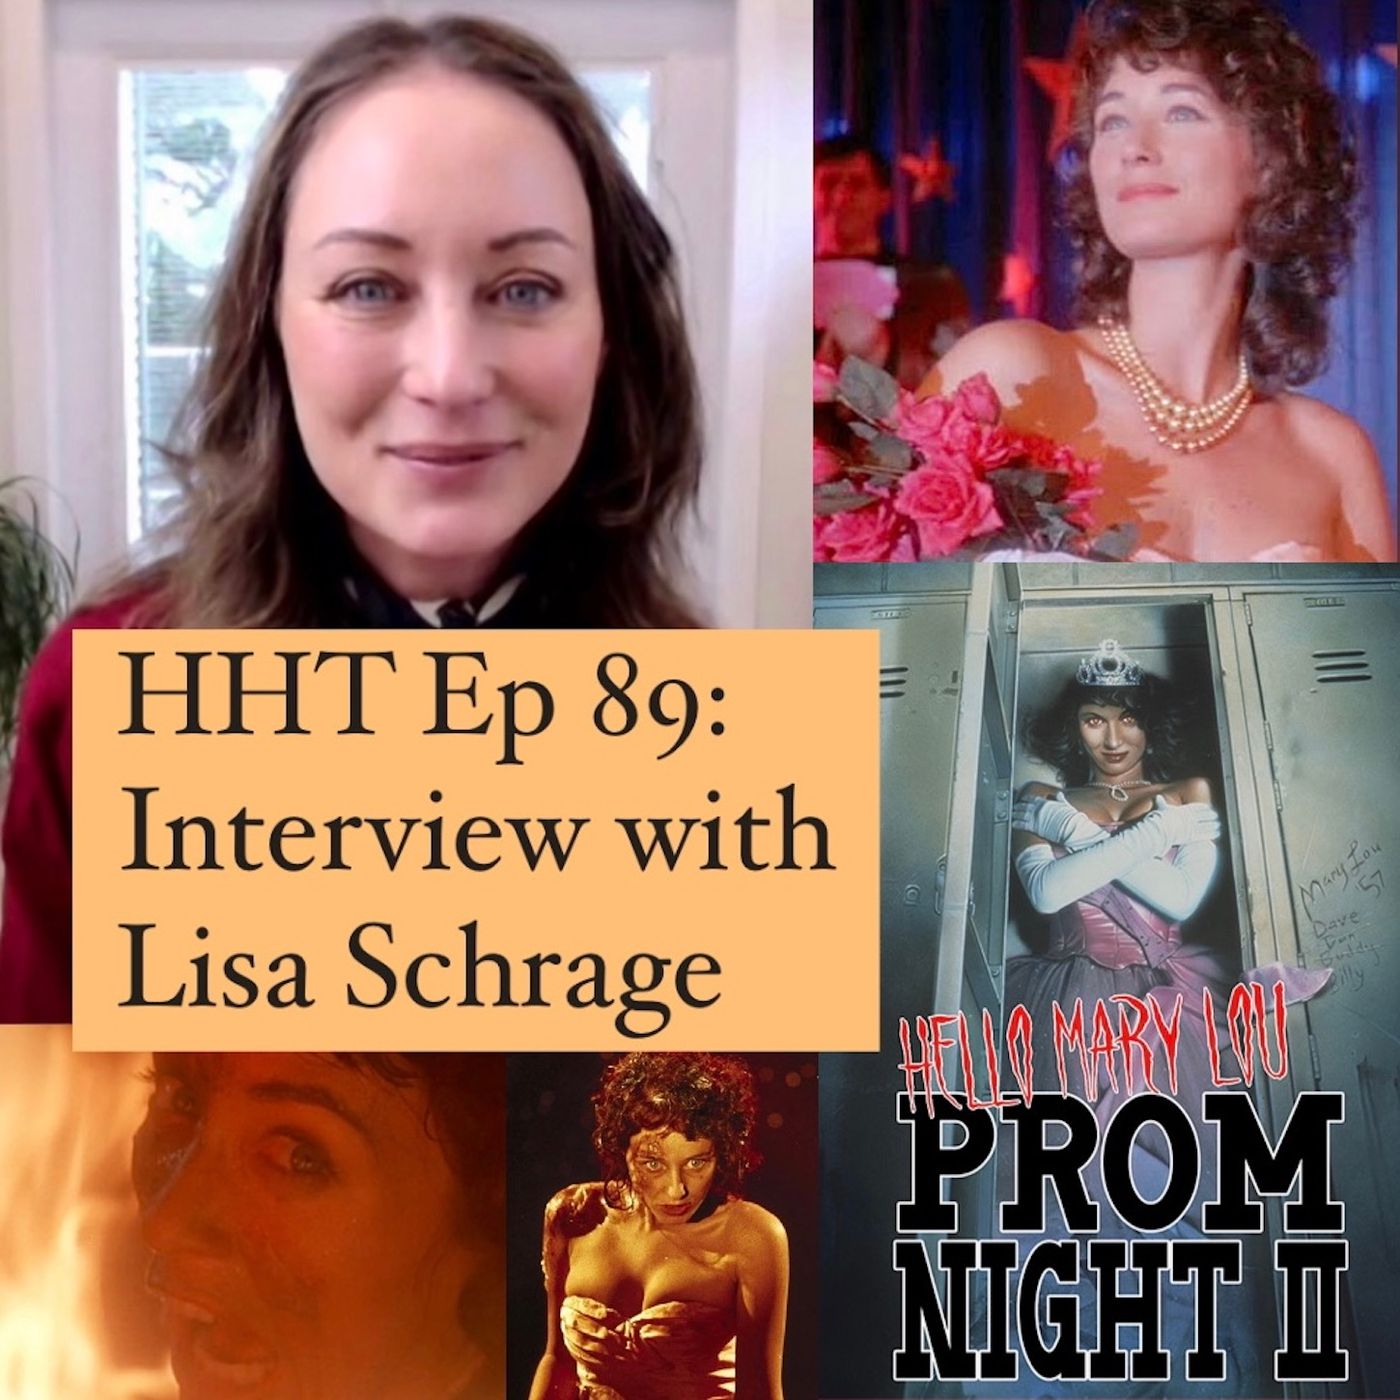 Ep 89: Interview w/Lisa Schrage from "Hello Mary Lou: Prom Night II" Image